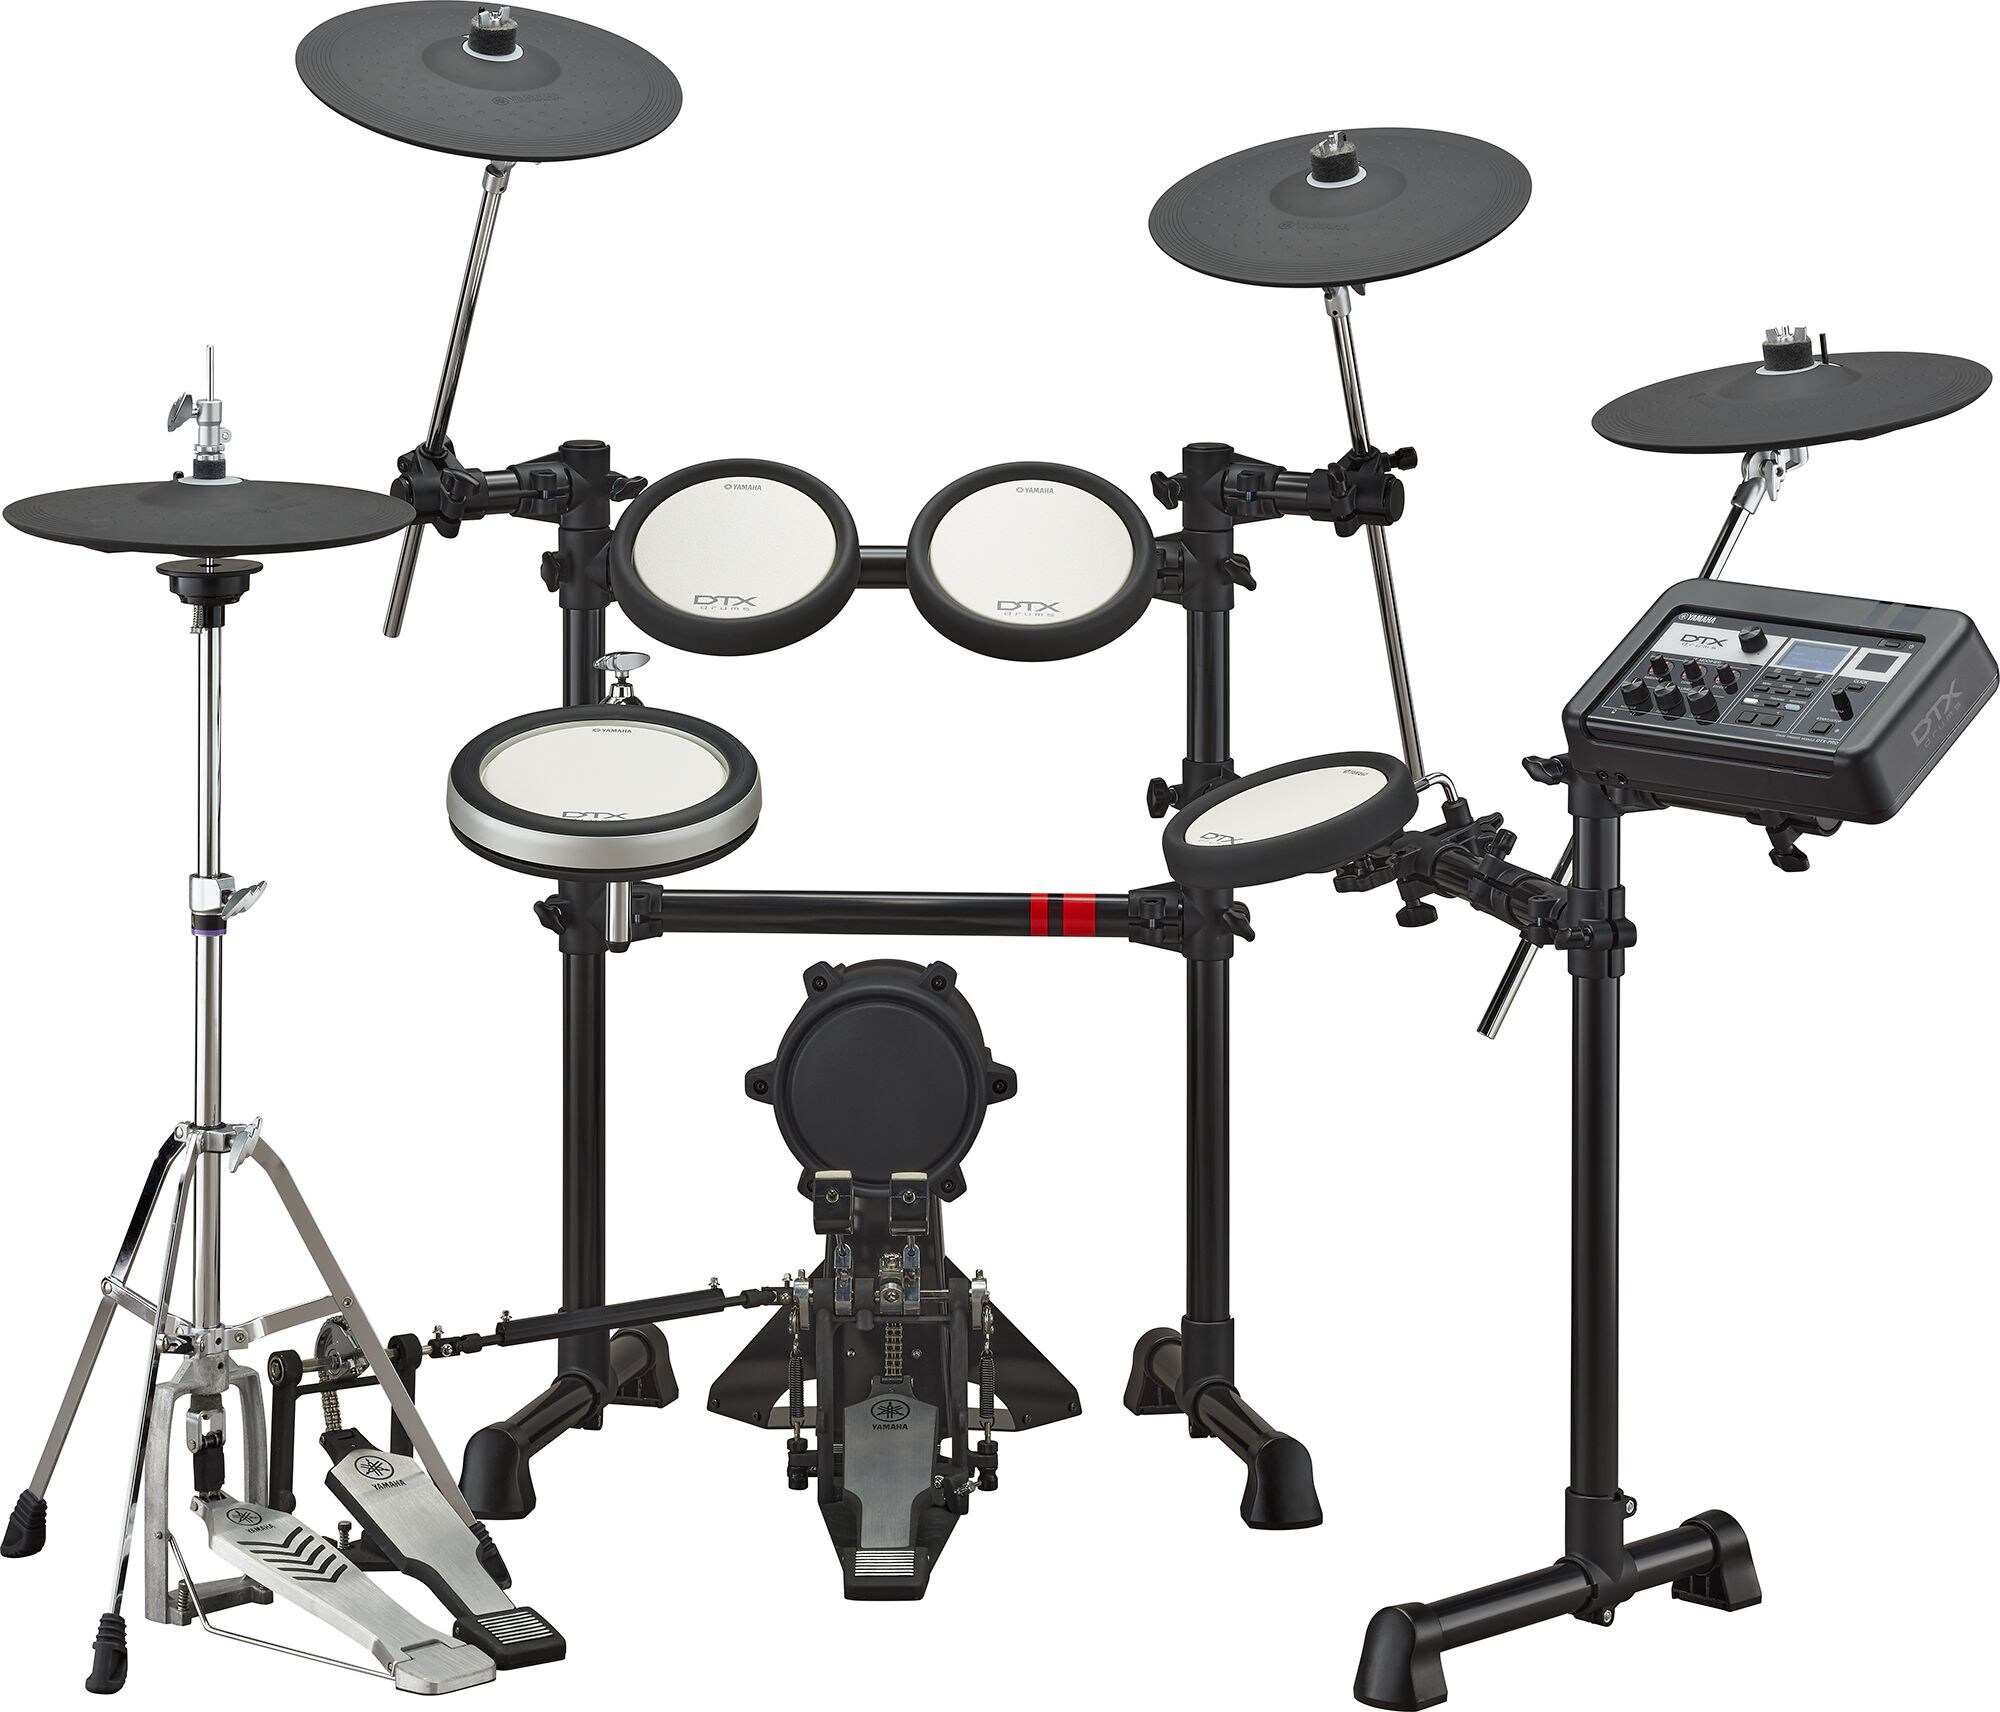 - Africa - / Instruments Drums Latin / - Electronic / Asia East - Yamaha America DTX6 Series Drum Products Middle CIS - Drums / - / Musical Oceania - Electronic - Kits Products